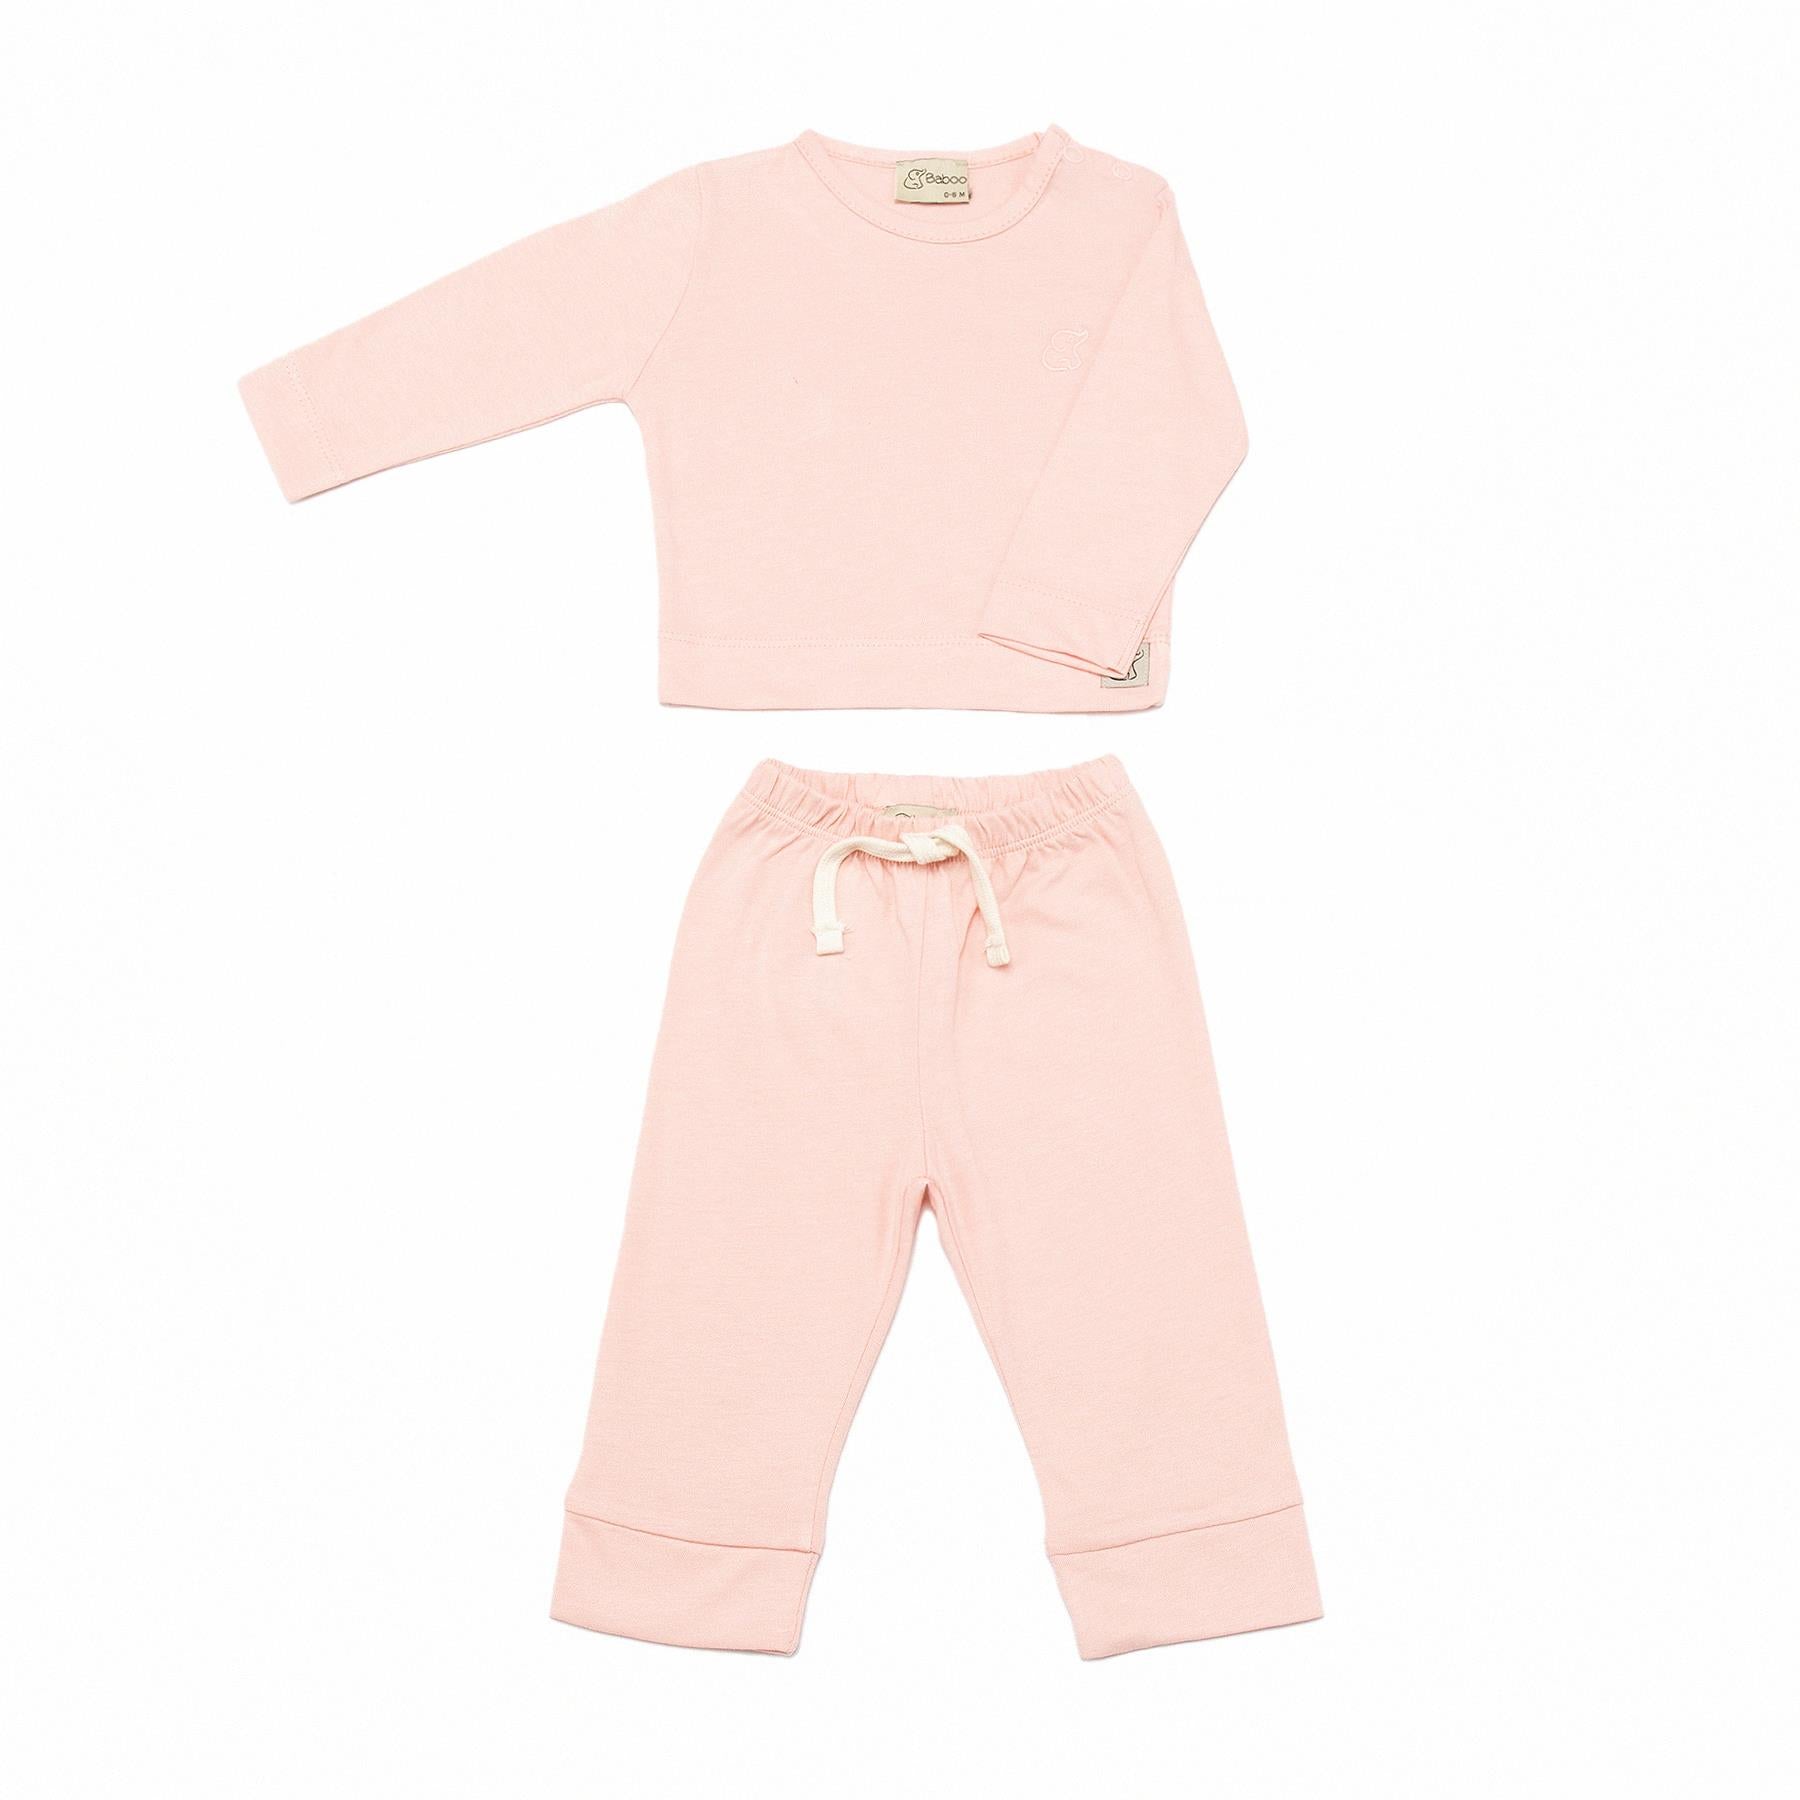 Organic Cotton Fabric Baby and Child Bottom and Top Set Pink